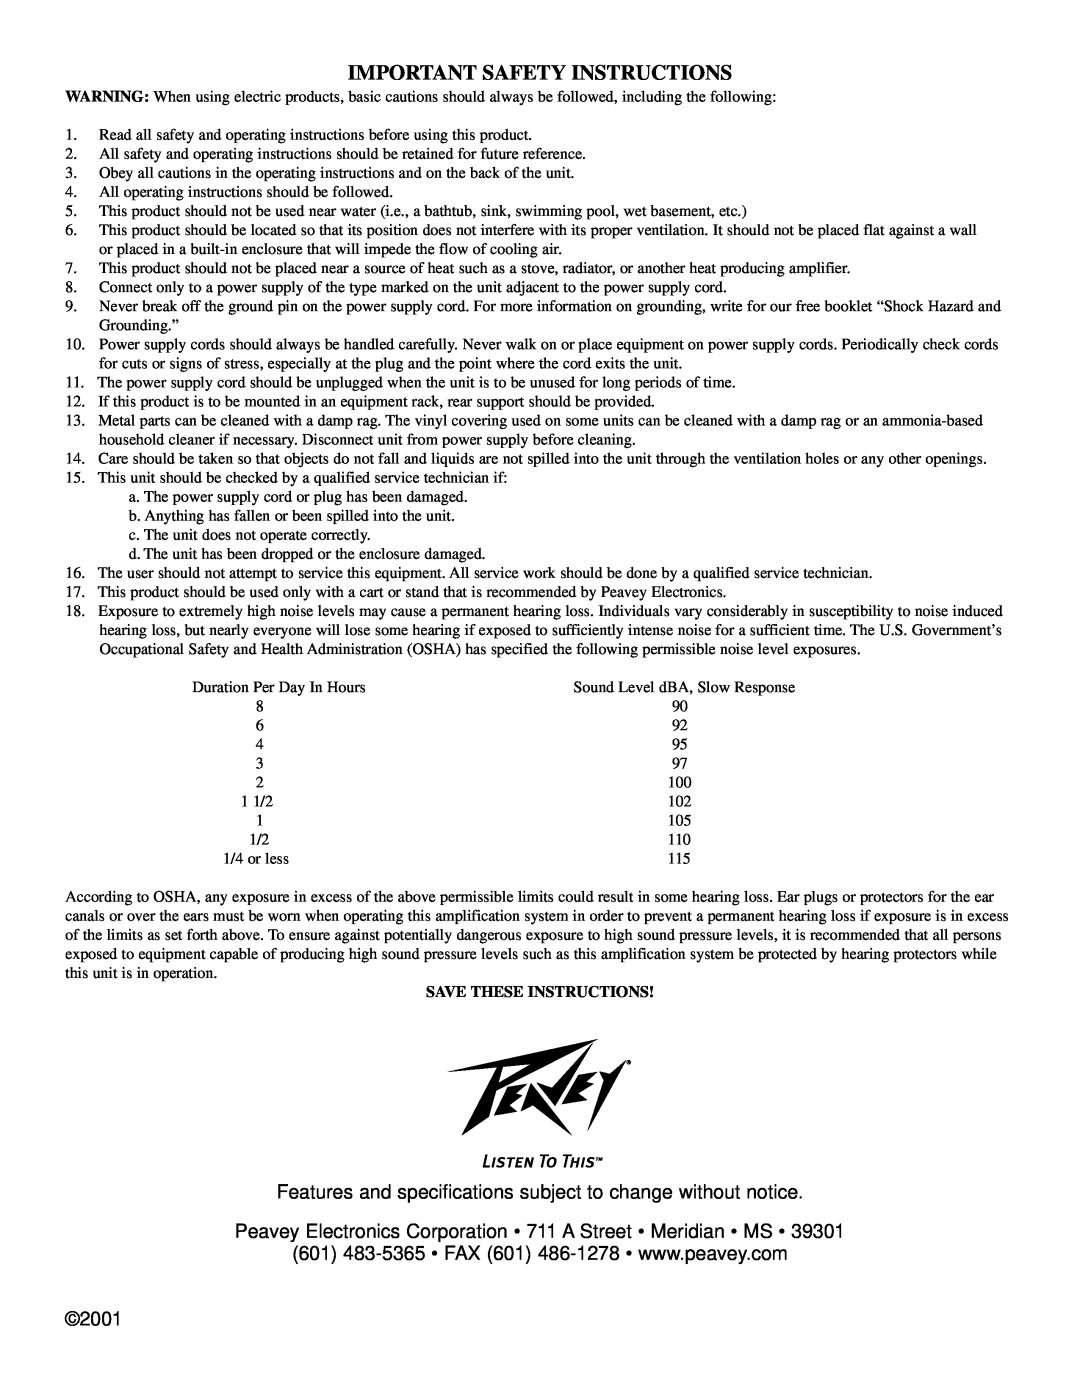 Peavey QF131, QF215, Q215B manual Important Safety Instructions, 2001, Save These Instructions 